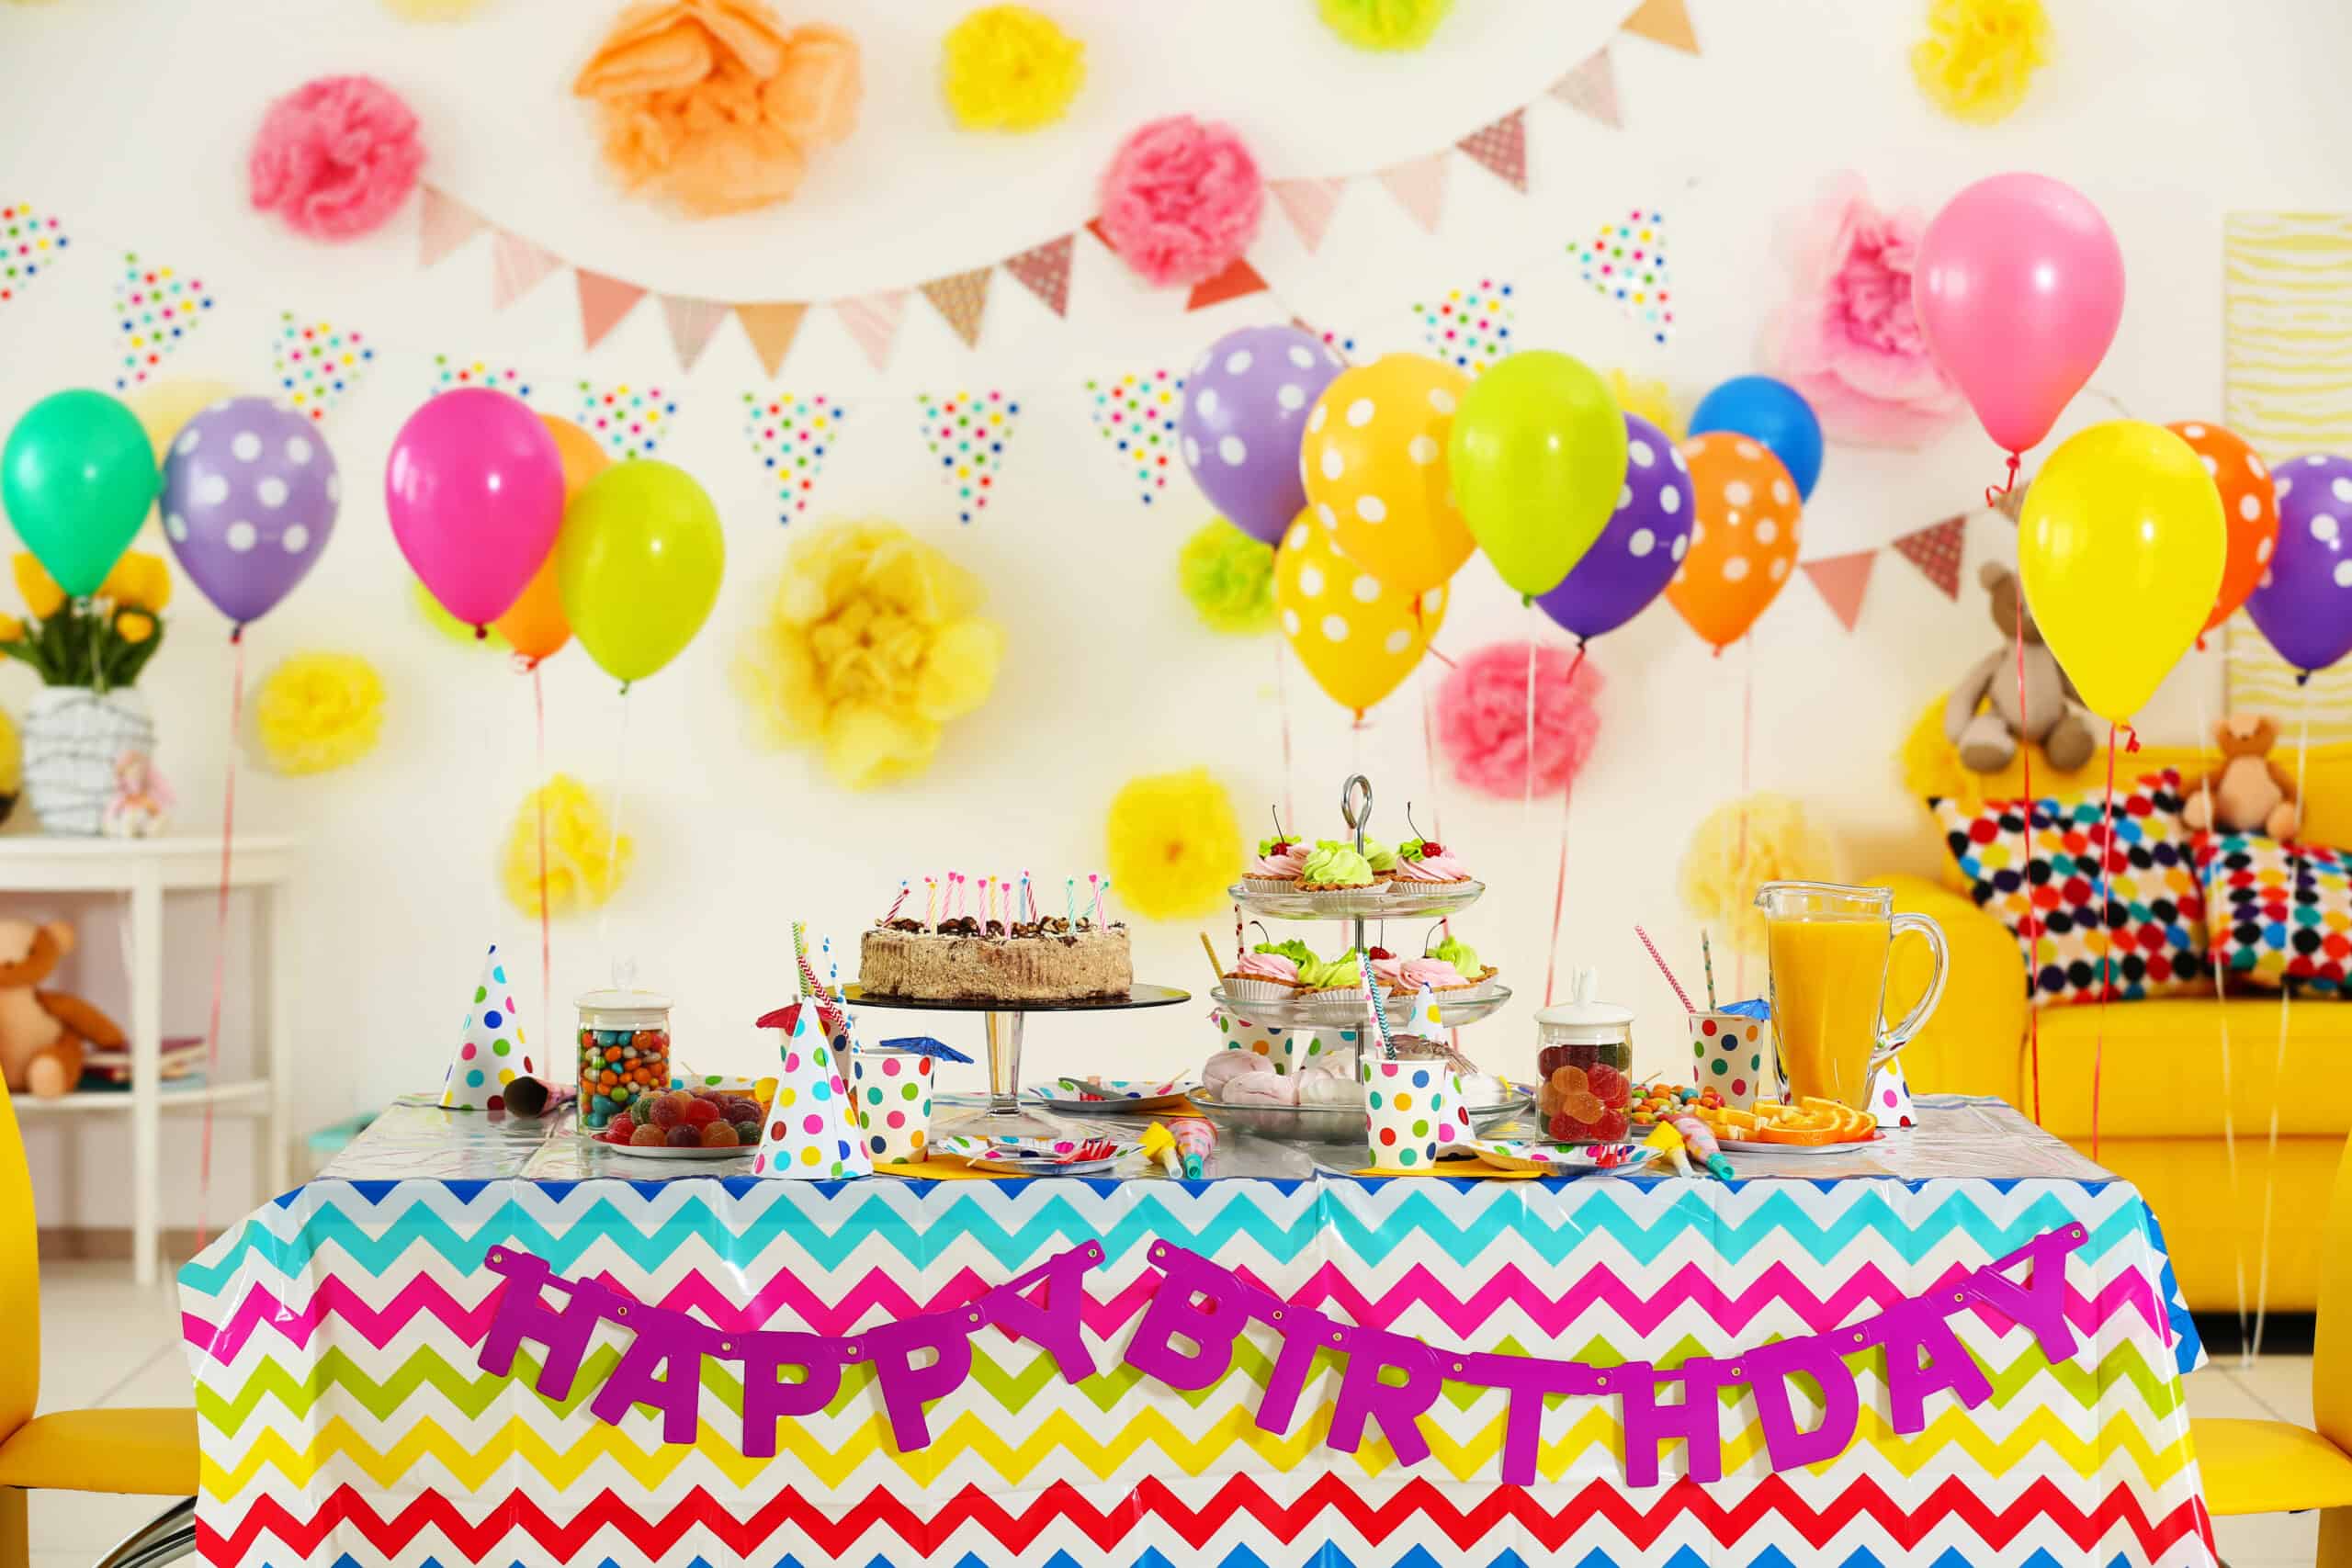 Colorful table set up for birthday party.